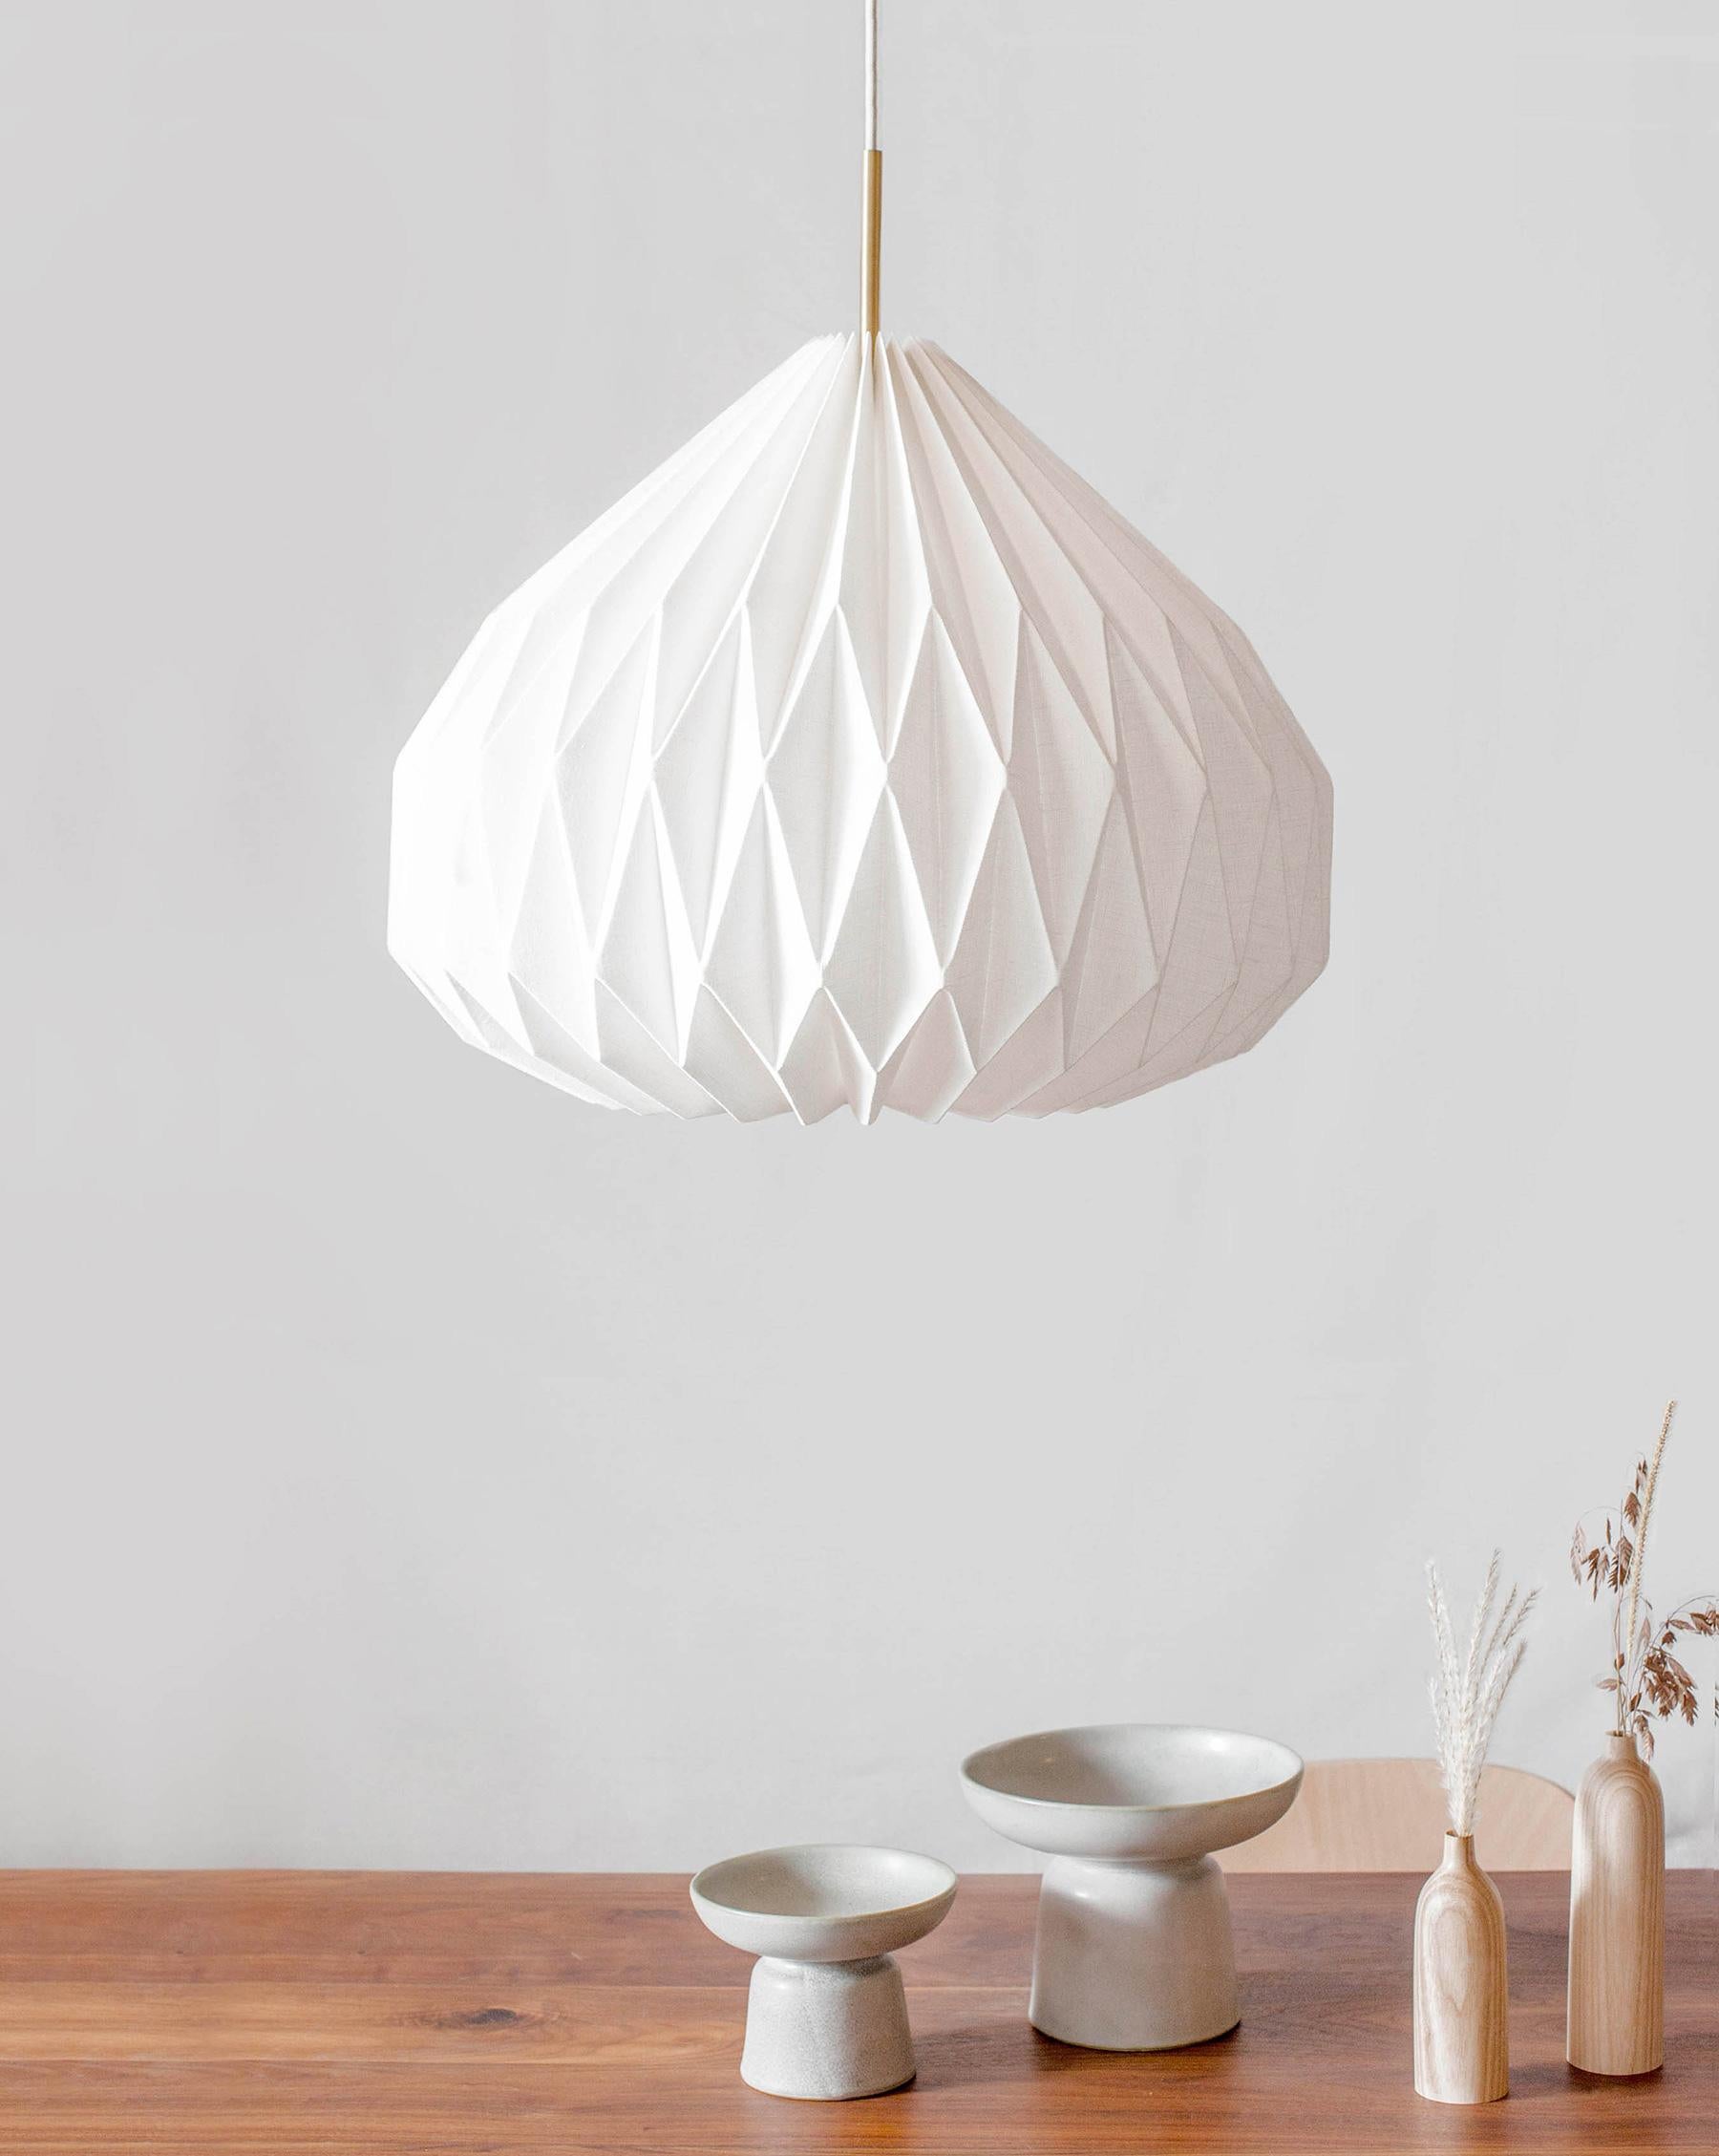 This modern-style pendant light will add an interesting and functional work of art to your interior.
Made of hand-folded laminated line fabric,  the pendant shade provides soft ambient lighting while maintaining a delicate and refined aesthetic with